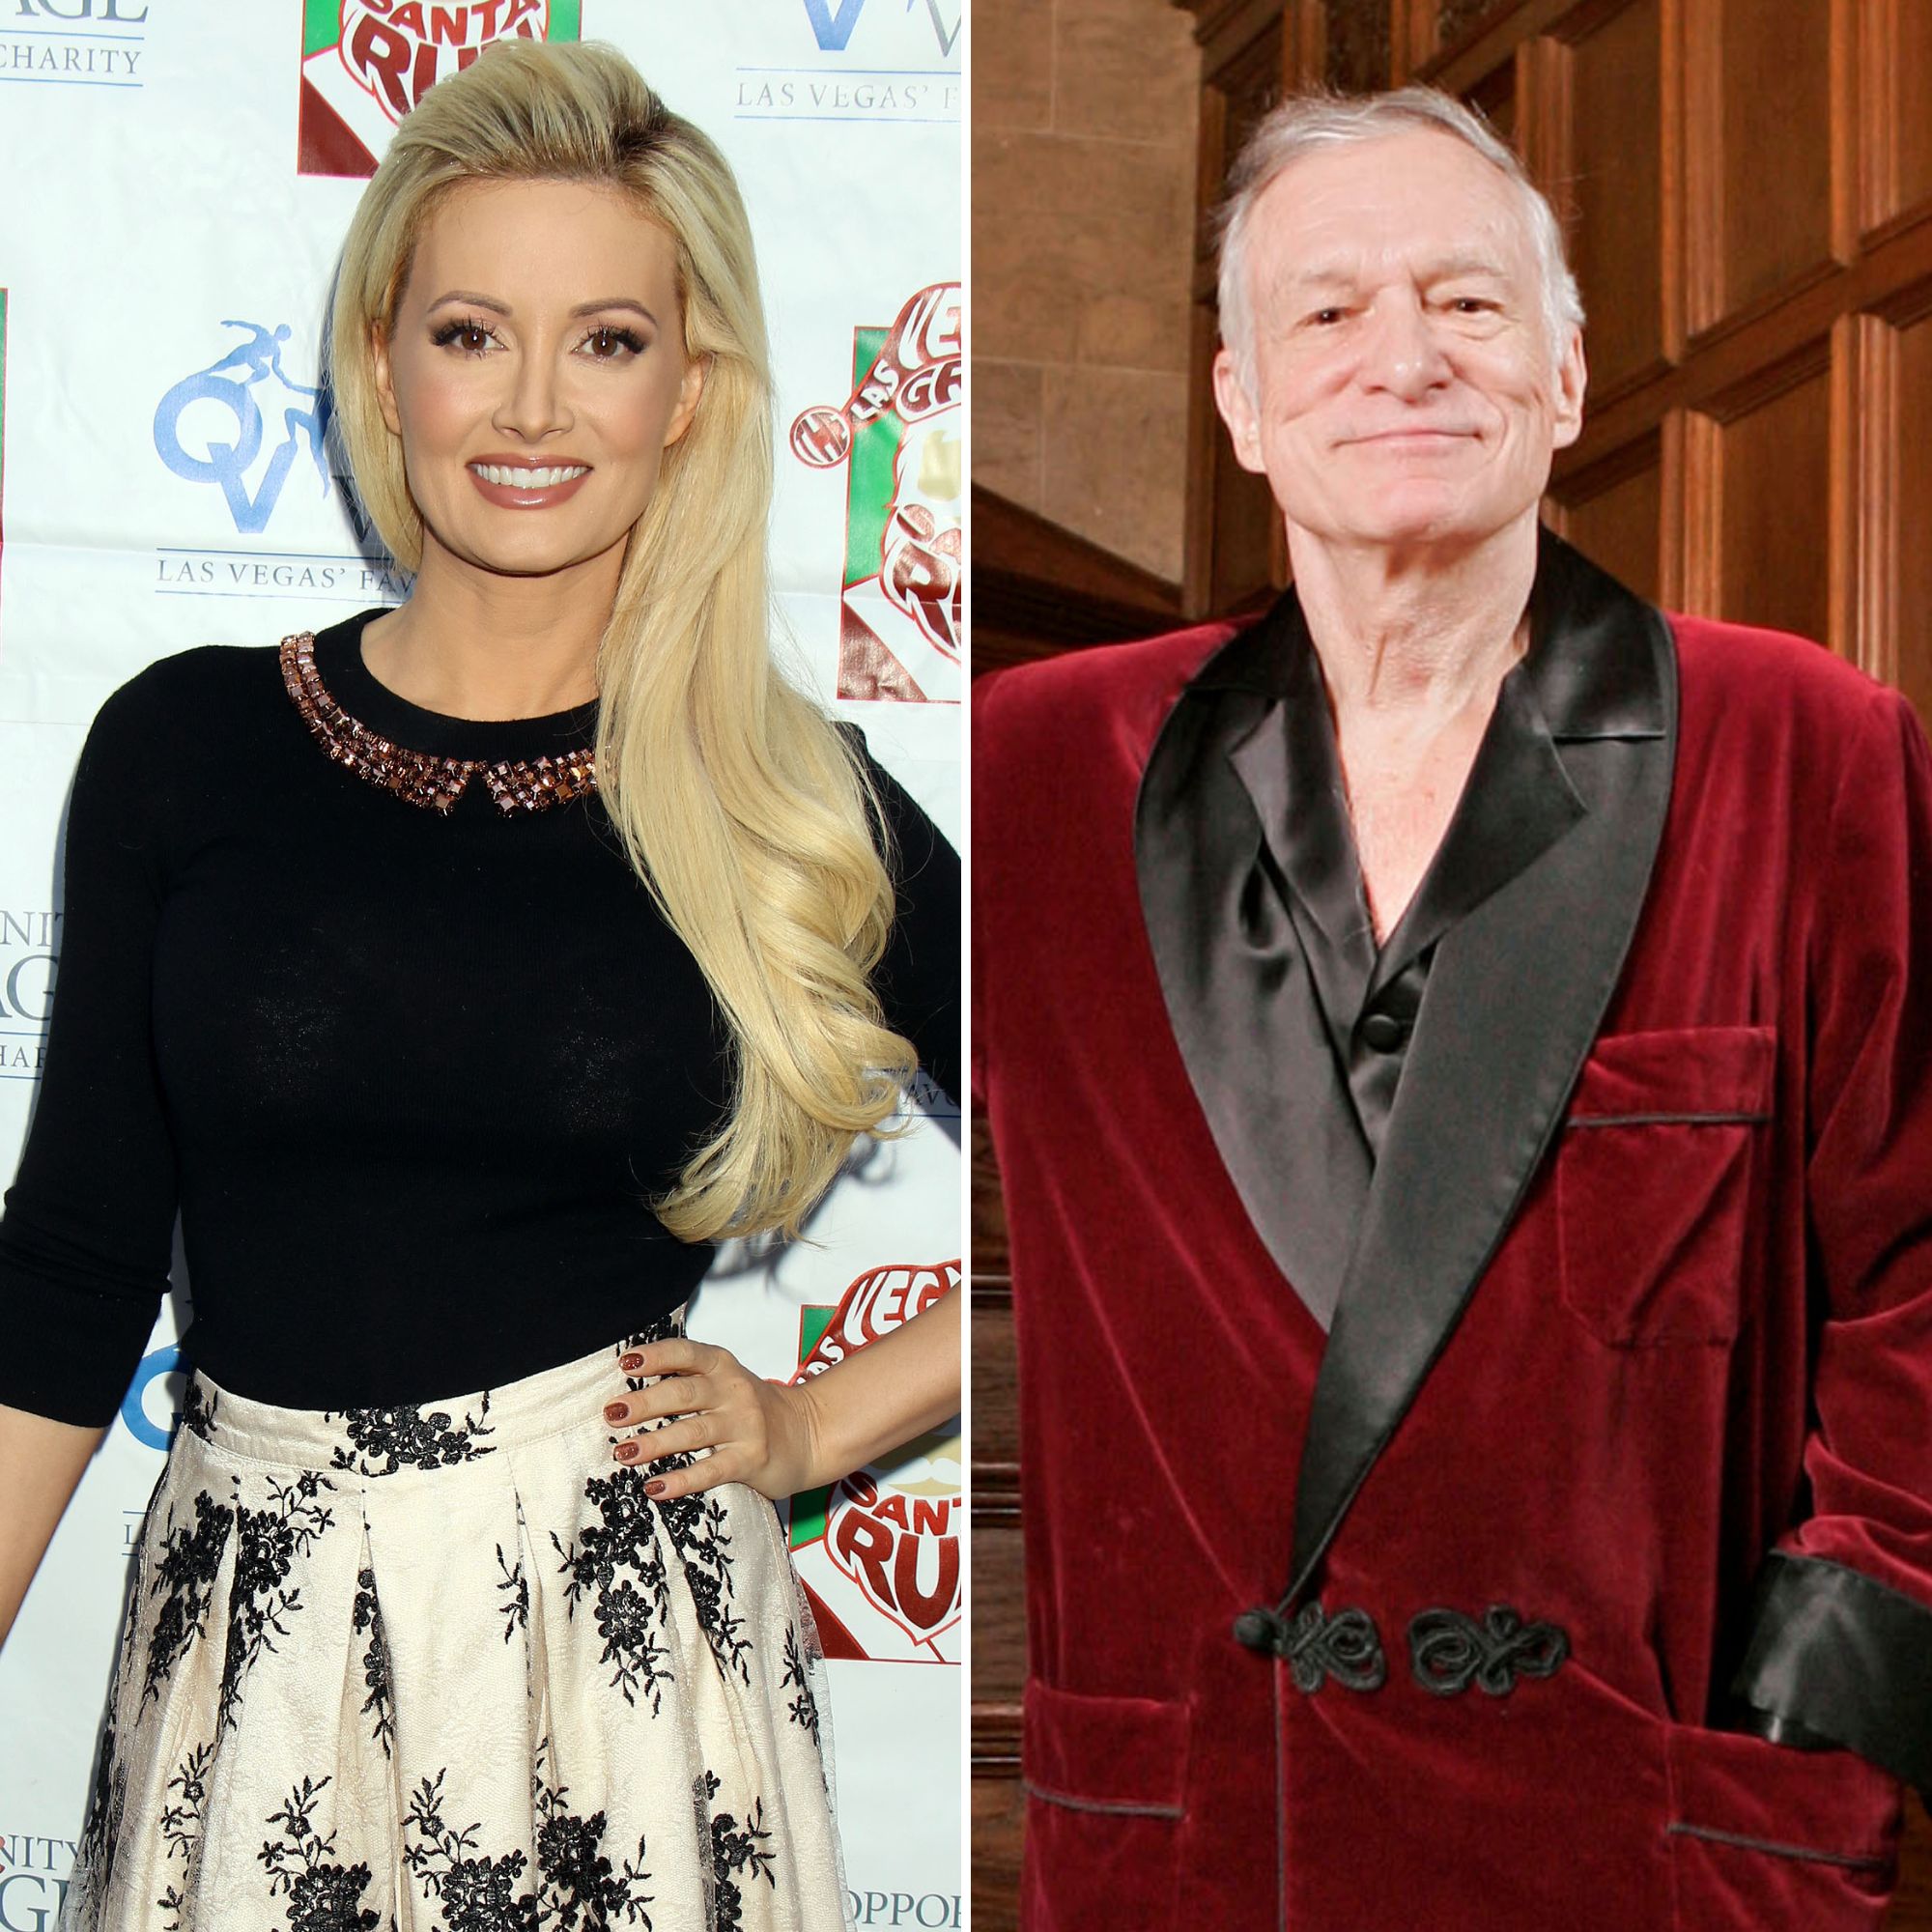 Holly Madisons Quotes on Sex Life With Hugh Hefner image